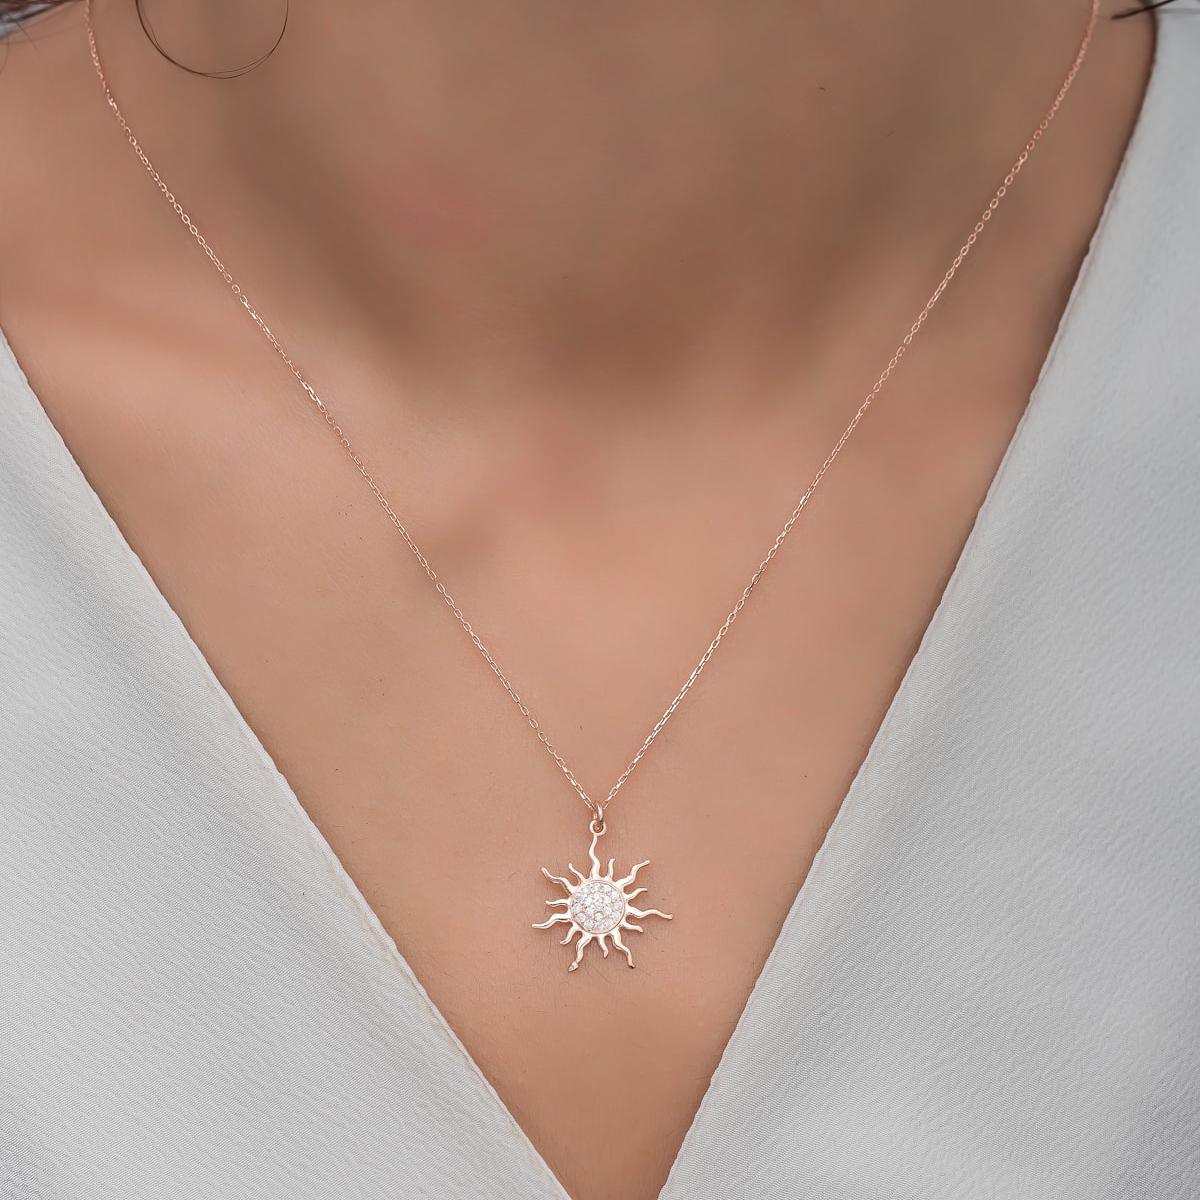 Sunshine Necklace Rose • You Are My Sunshine Necklace • Gift For Her - Trending Silver Gifts